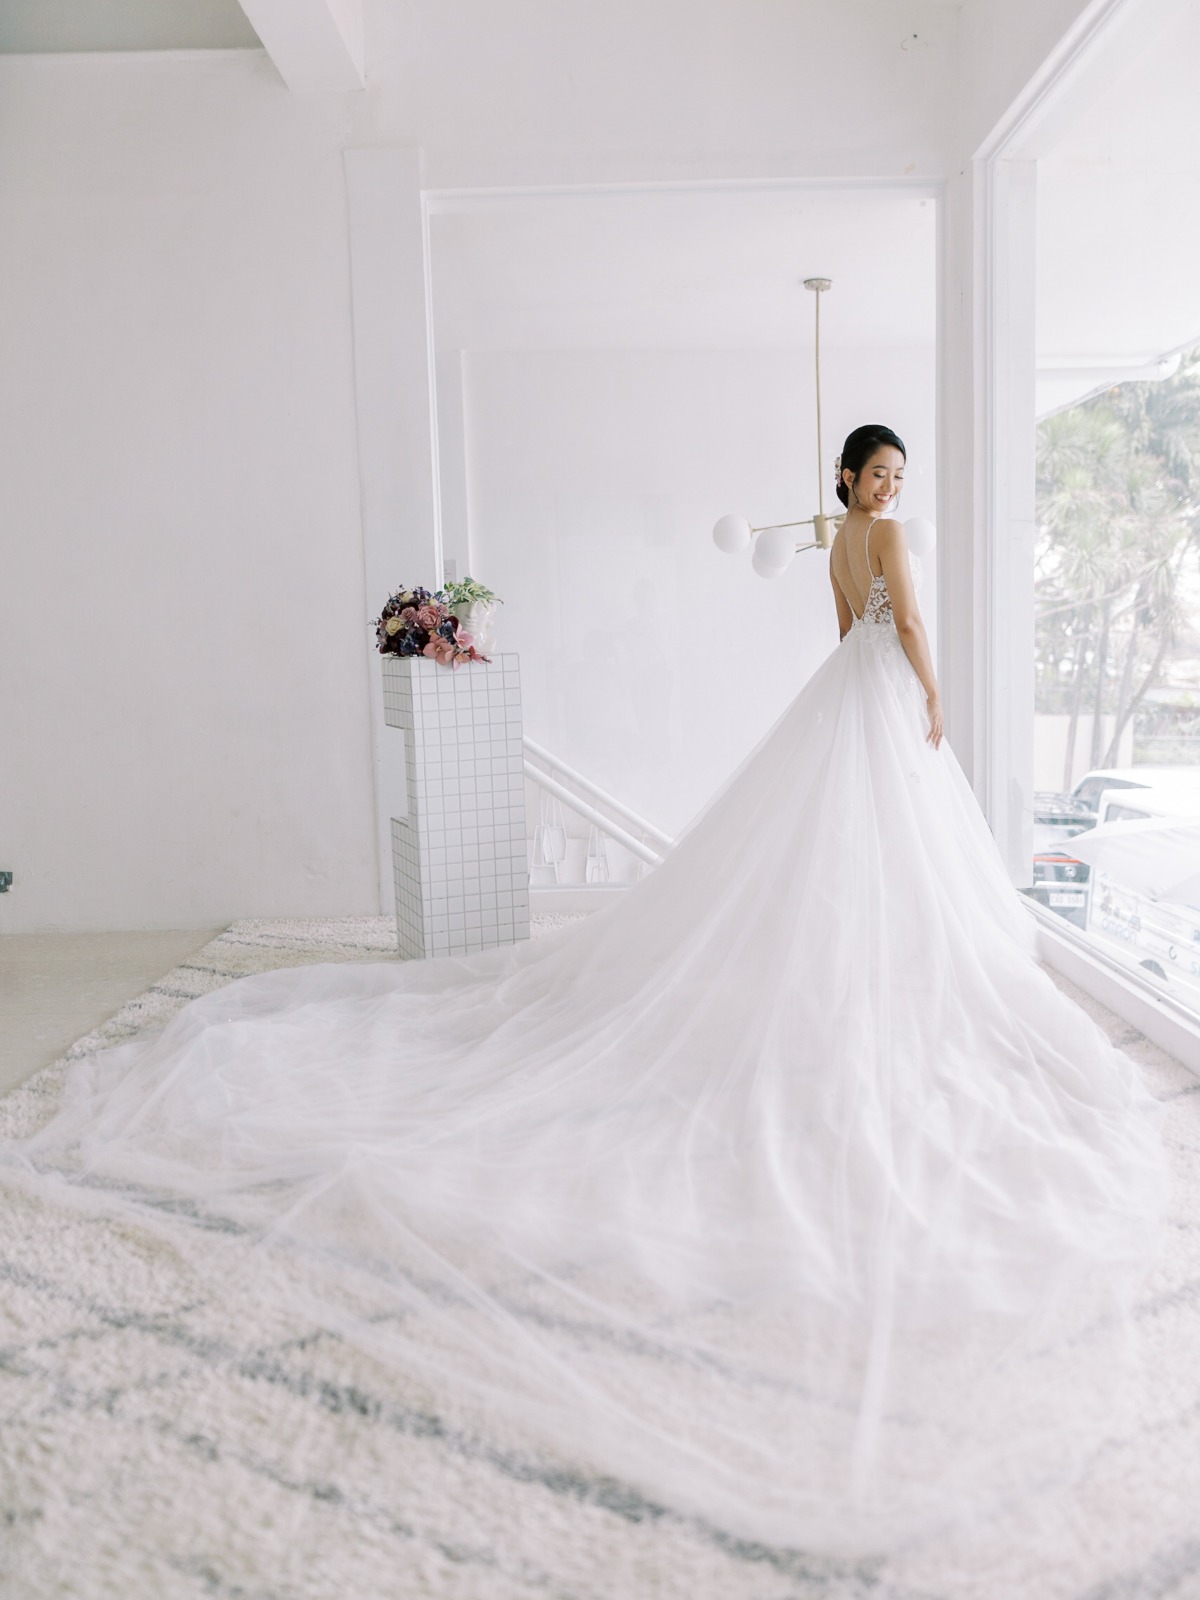 Portrait of cathedral tulle train on bride's dress